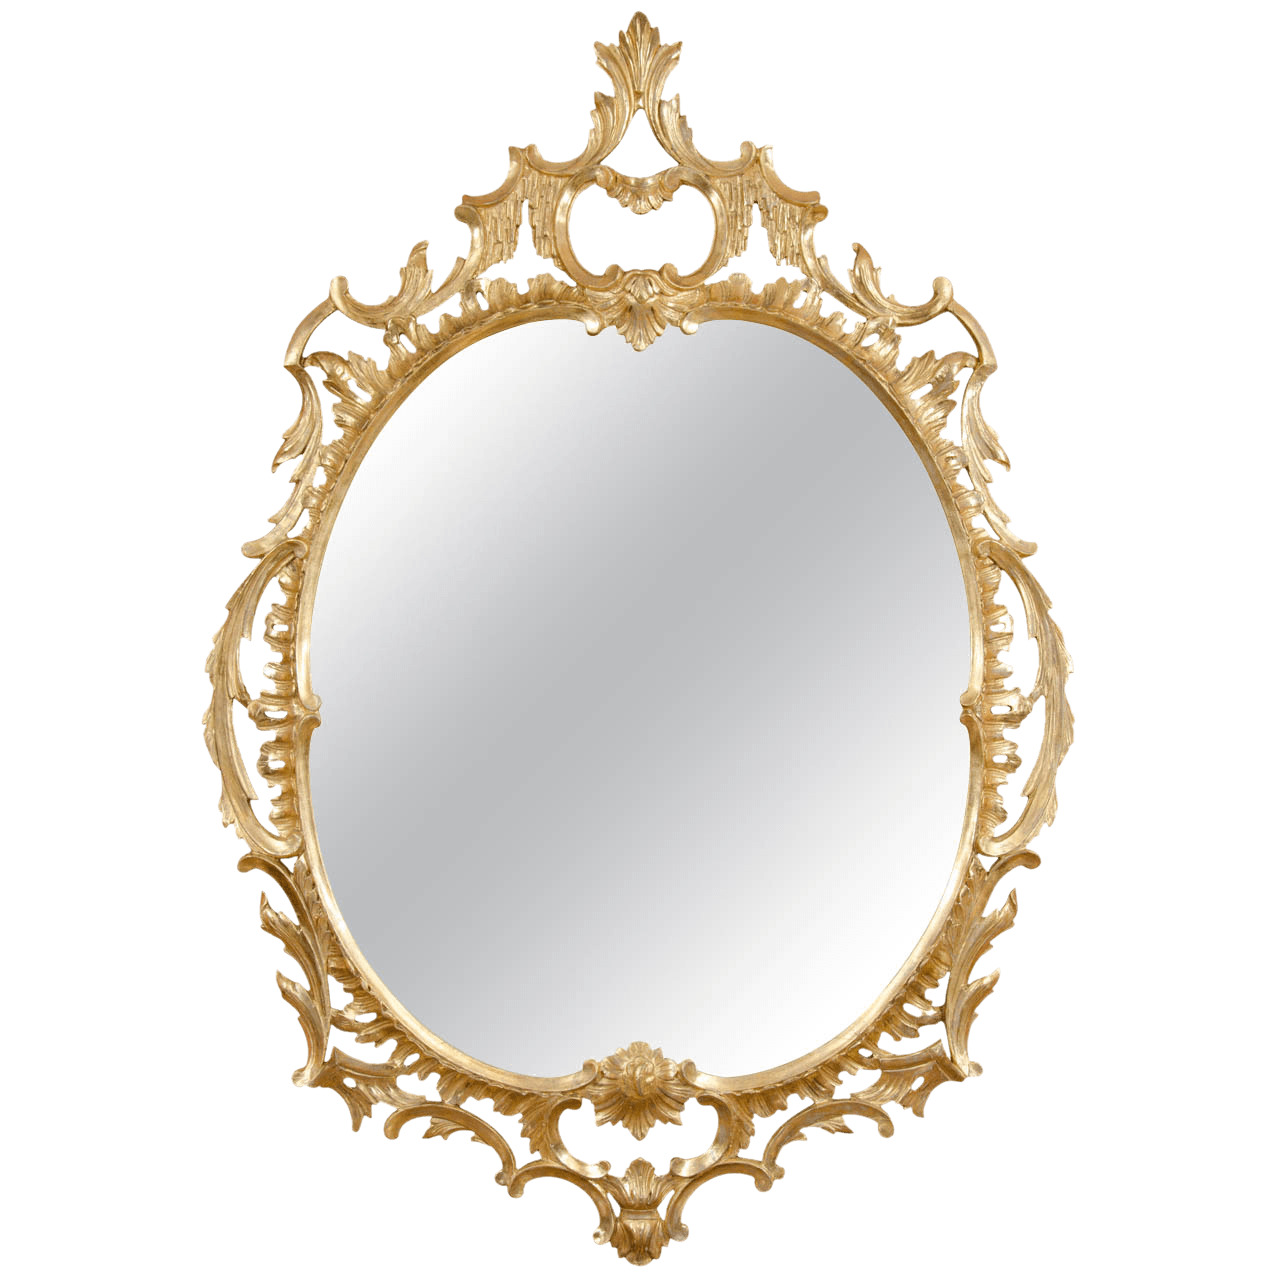 Mirror Gold Simple icons